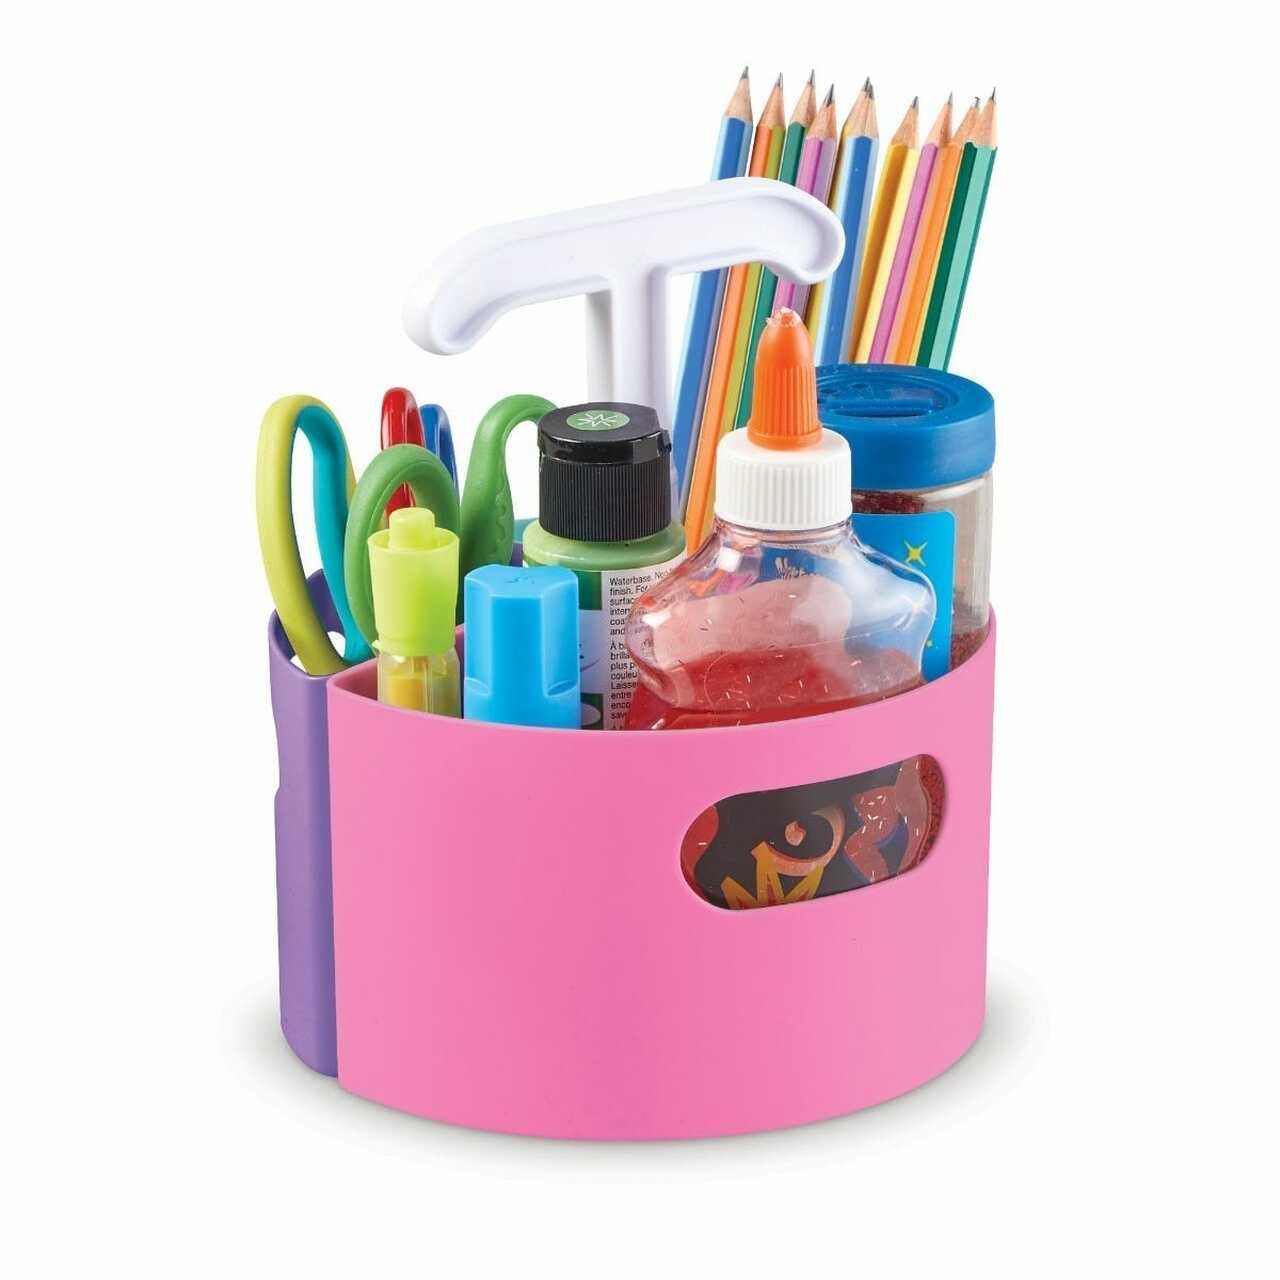 Create-a-Space™ Mini Centre - Pastel, Take creativity everywhere it takes you with a mini pastel version of multicolour Create-A-Space Mini-Centre. Tidy, sort and store maker materials and move them wherever you need them. This easy-carry stationery storage organiser is ideal for classroom and home use. Three removable stationery storage compartments fit onto the easy-grip handle. The Create-A-Space Mini-Centre now in pastel! This sturdy stationary organiser brings an easy, convenient way to organize and pr